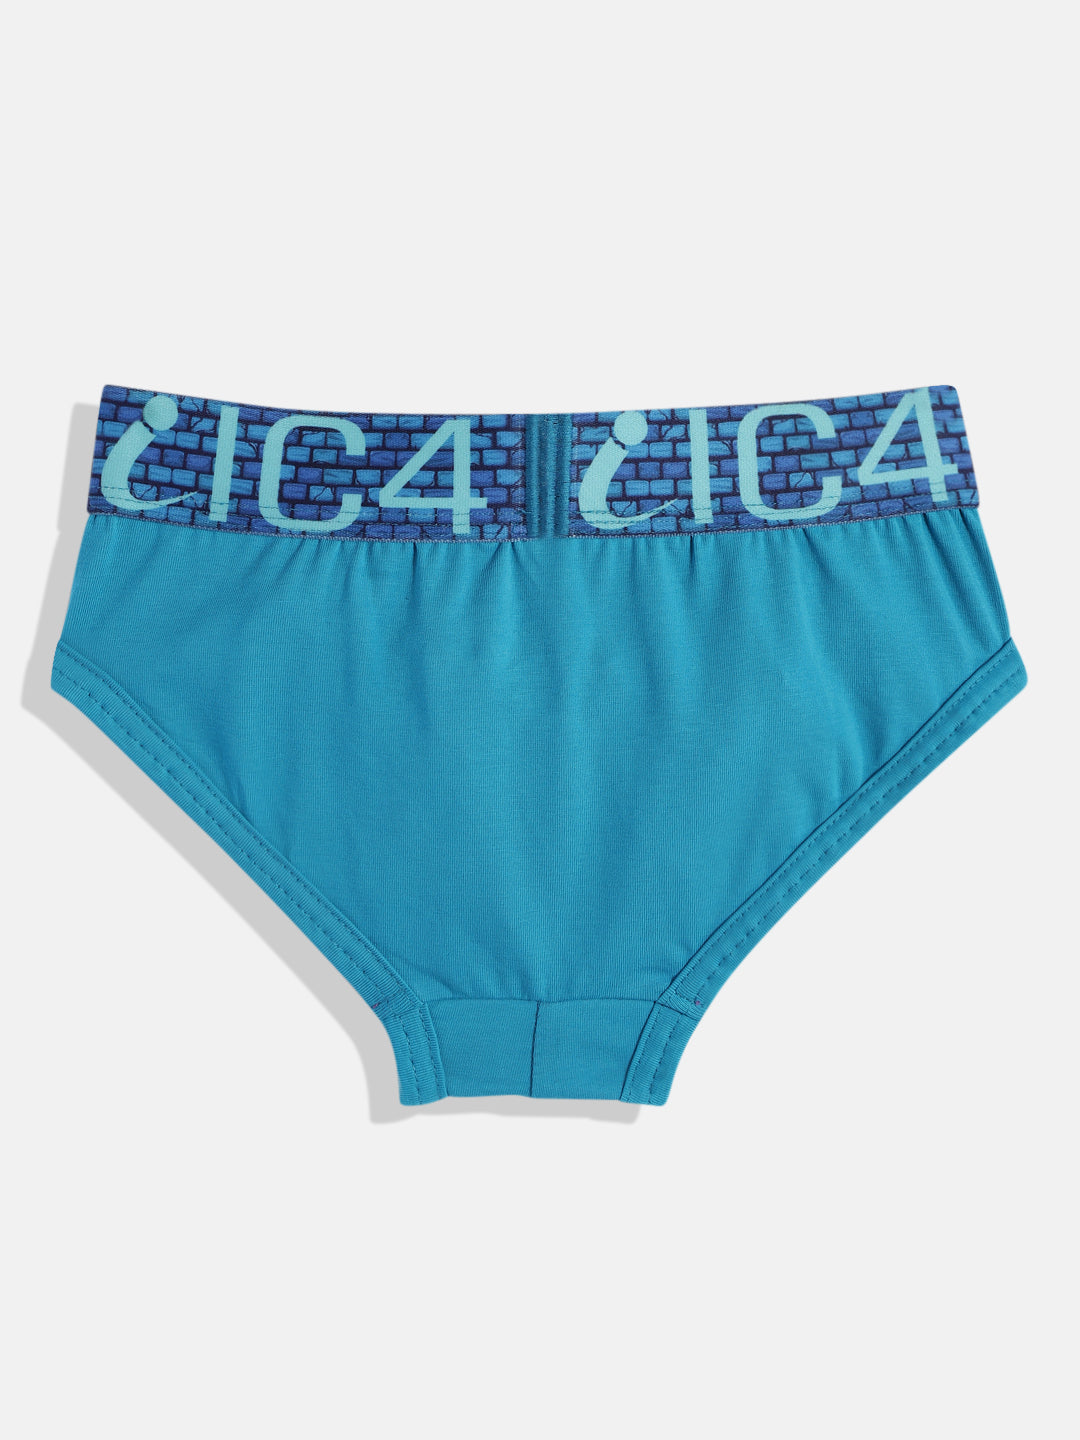 IC4 Boys Fashion Brief Combo Pack of 2 Teal